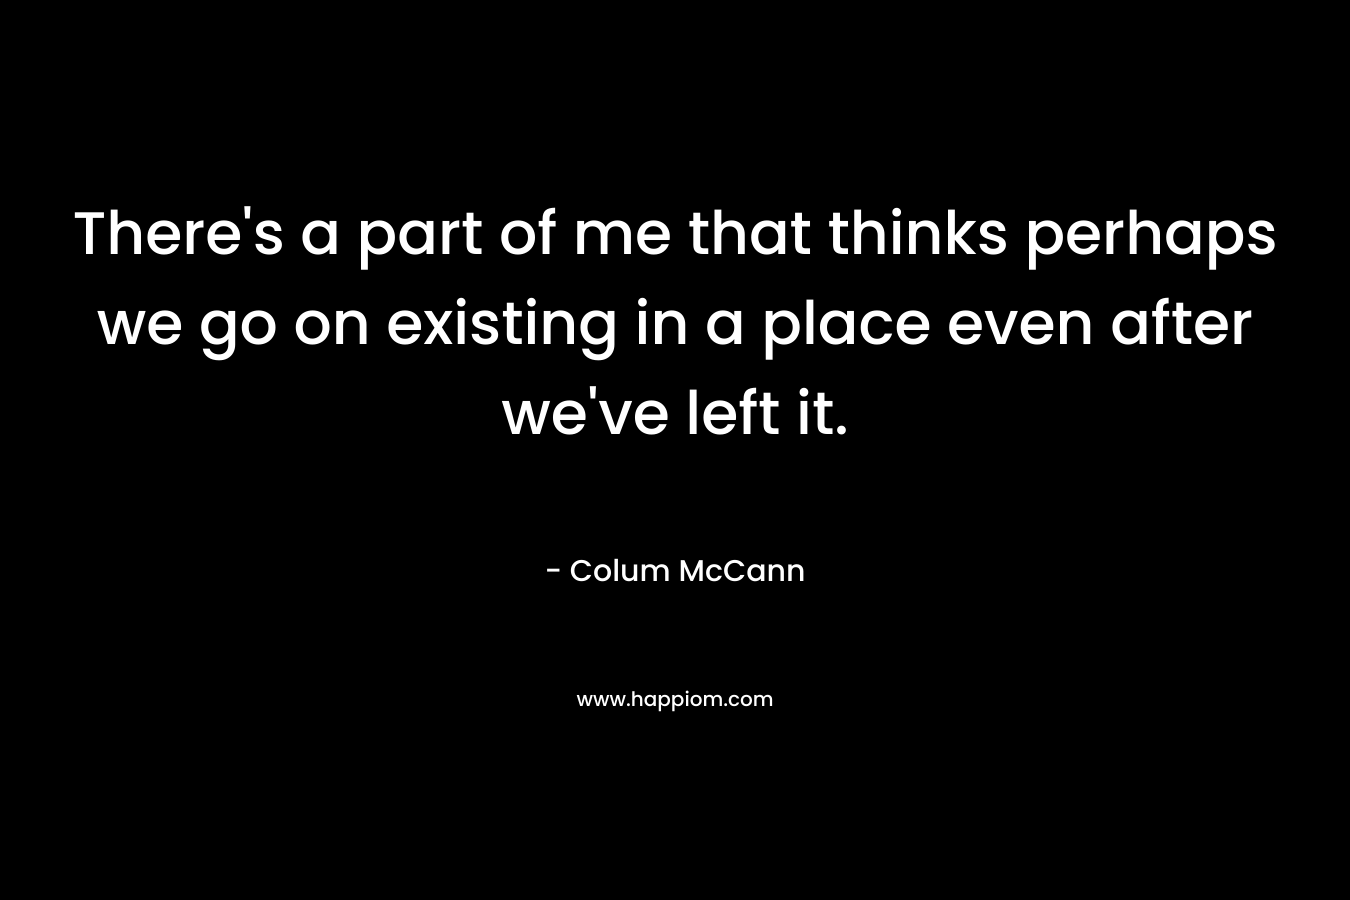 There’s a part of me that thinks perhaps we go on existing in a place even after we’ve left it. – Colum McCann